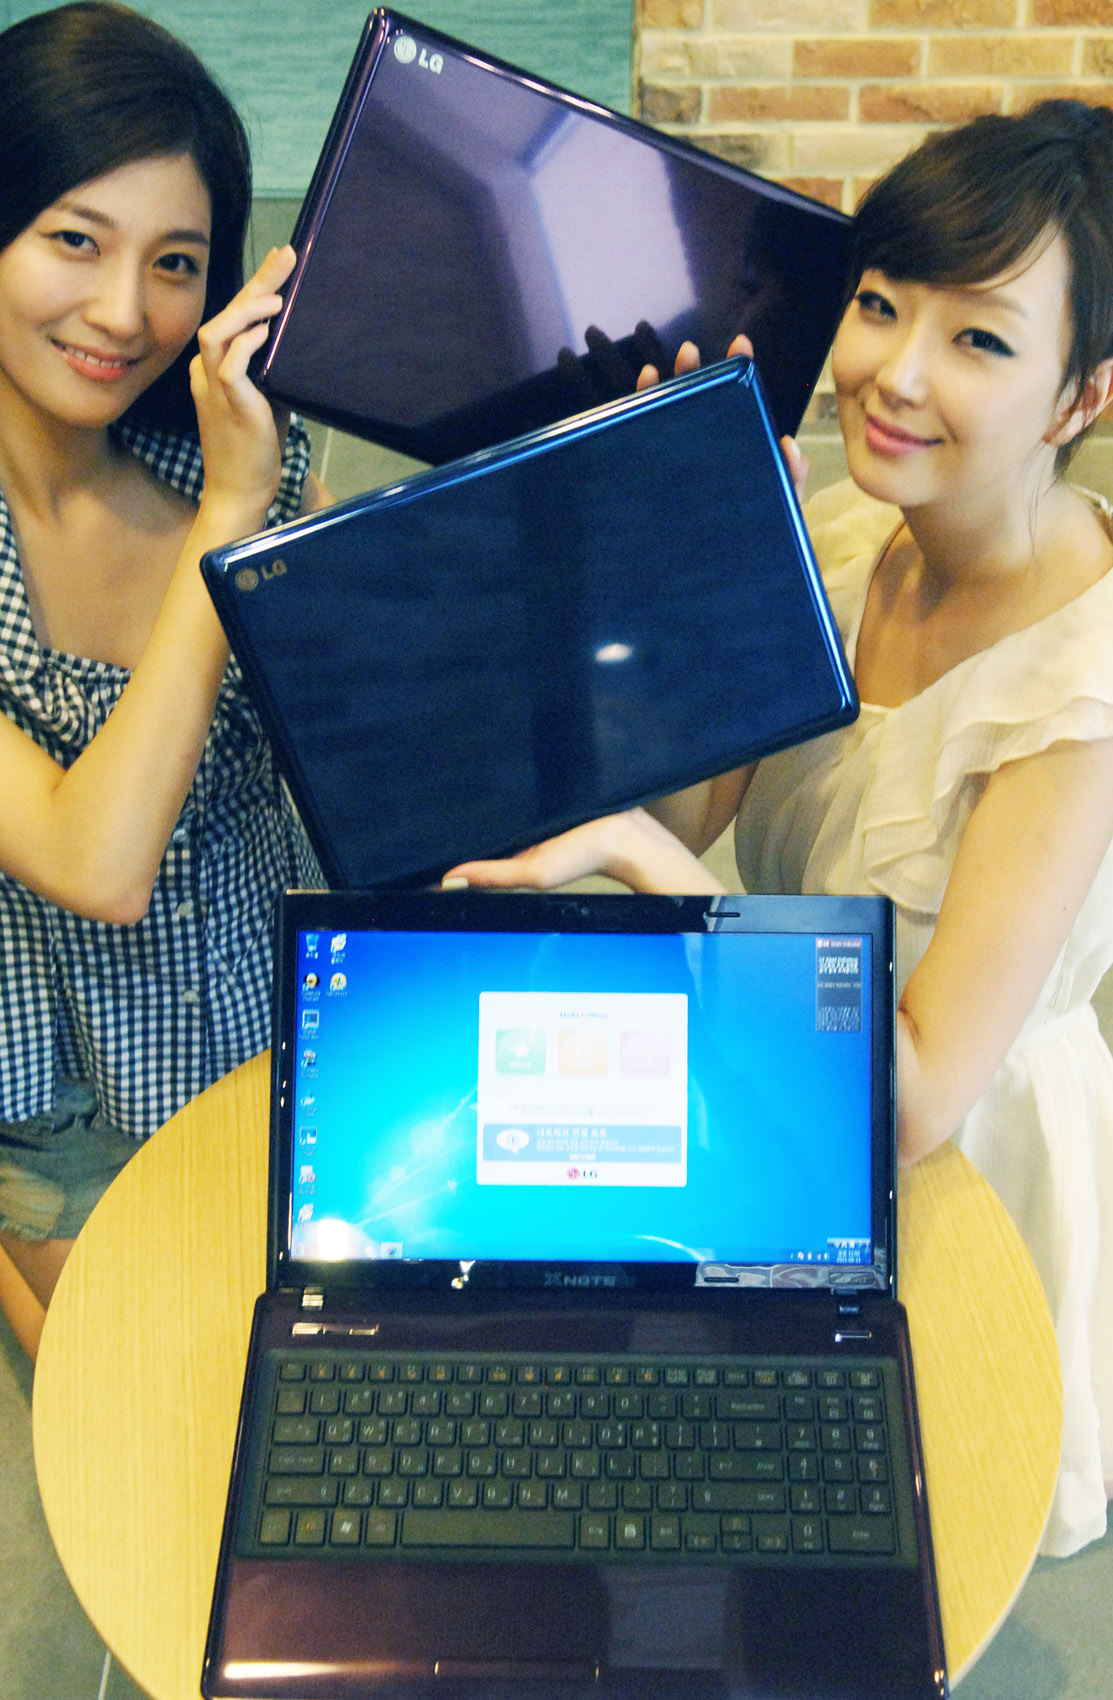 two women with open laptops are sitting at a table